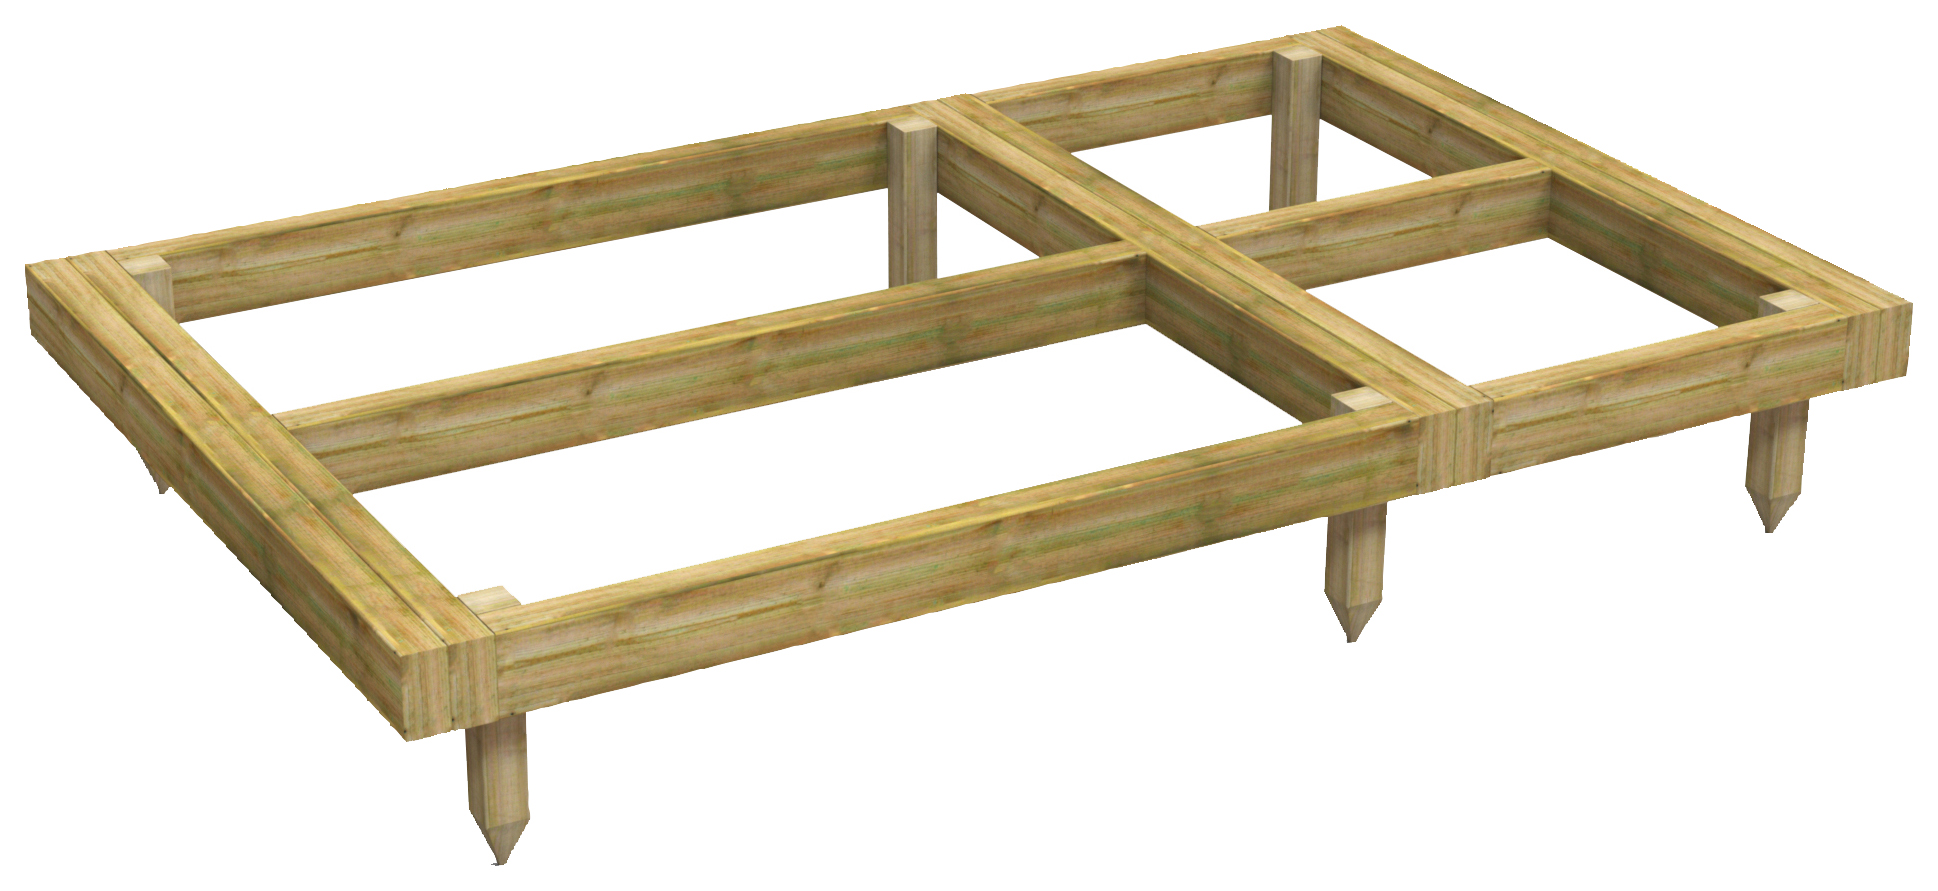 Image of Power Sheds 6 x 4ft Pressure Treated Garden Building Base Kit